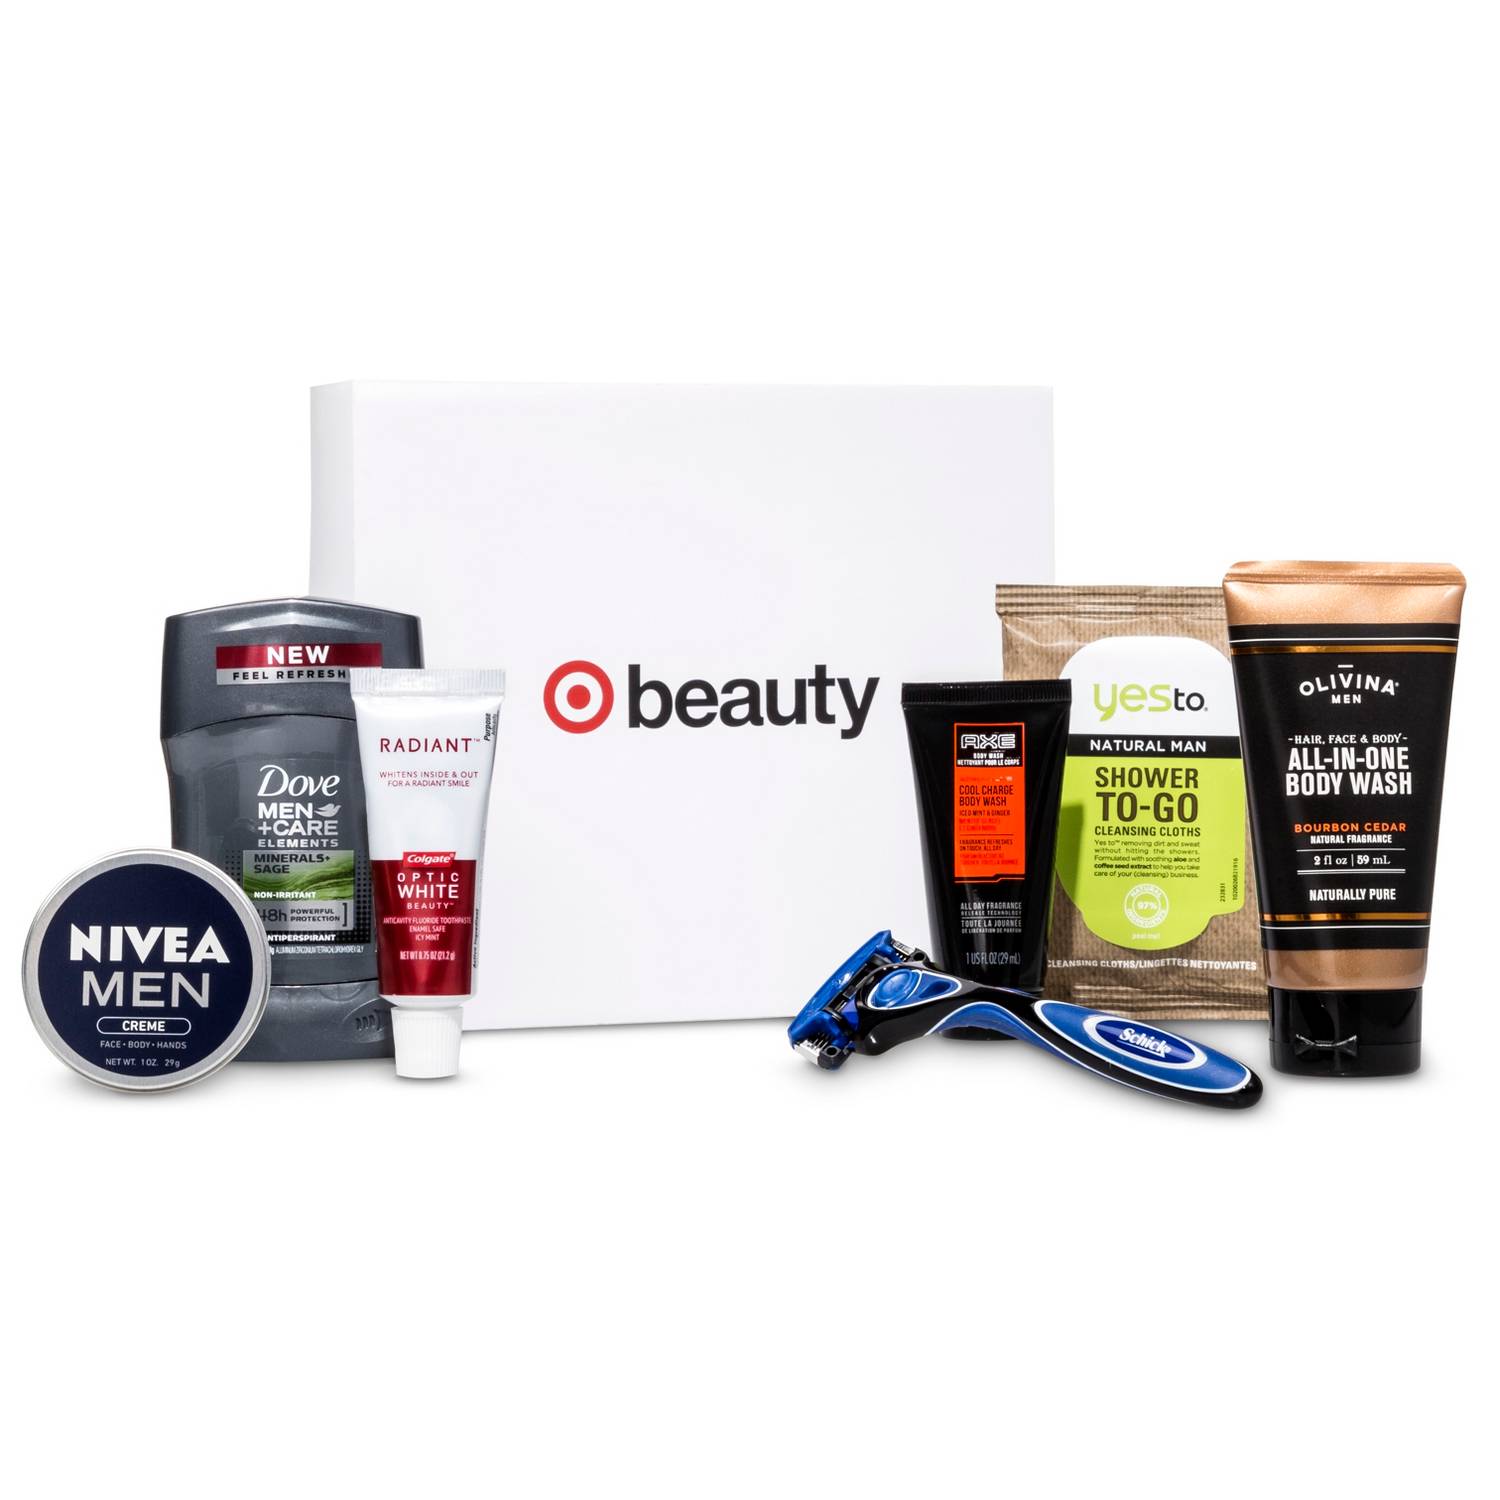 Target 7-piece Father’s Day edition beauty box for $7